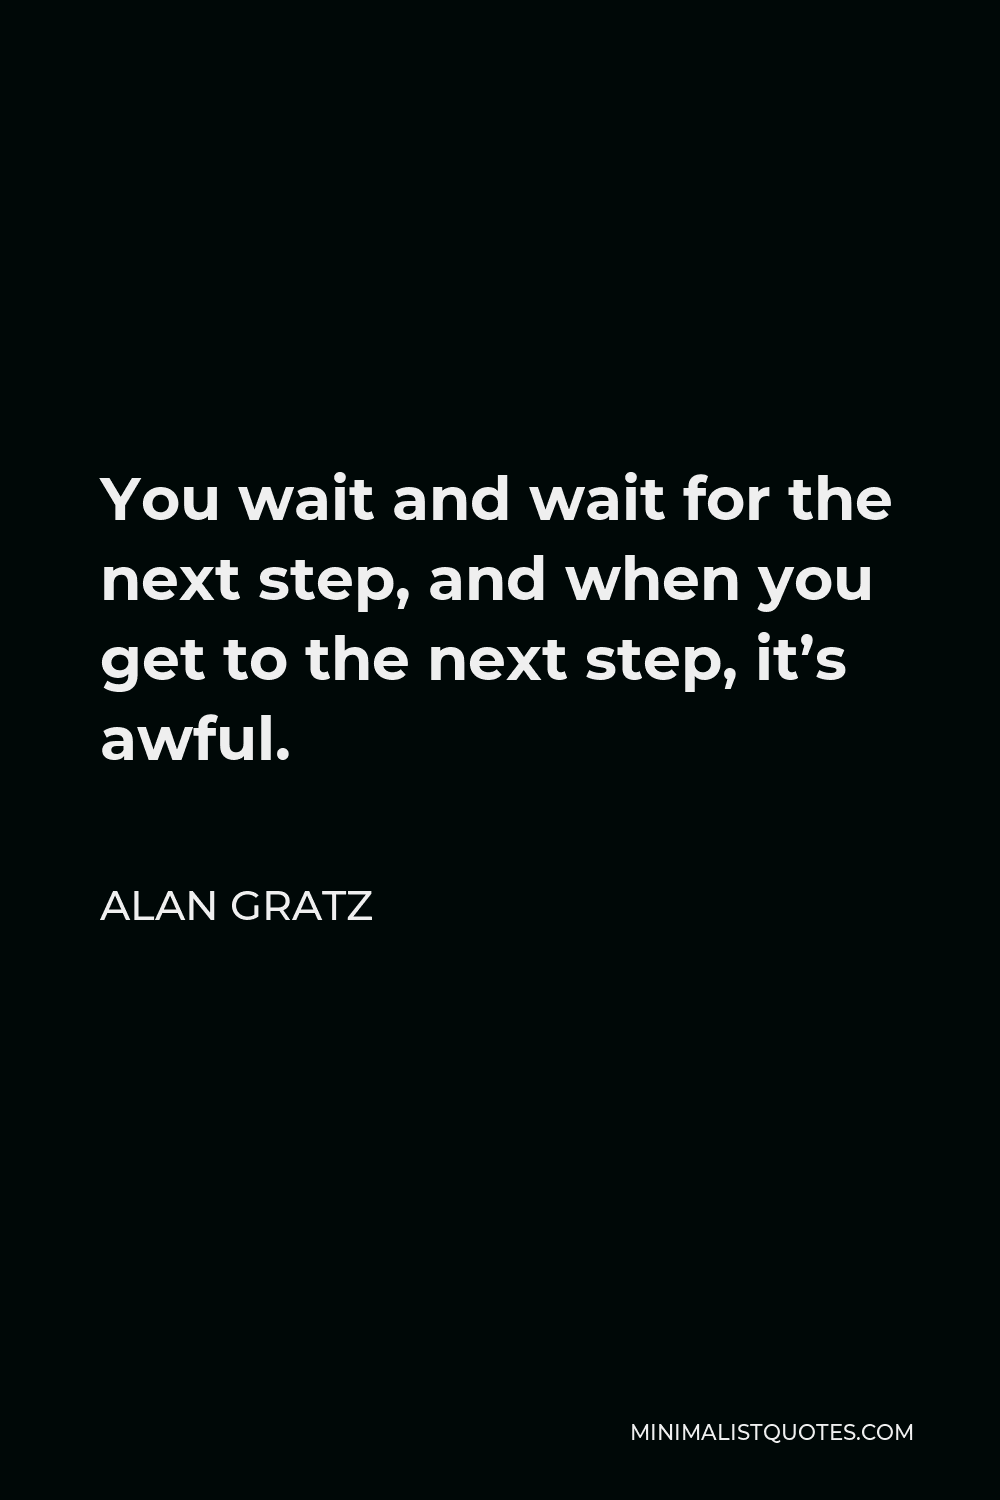 Alan Gratz Quote - You wait and wait for the next step, and when you get to the next step, it’s awful.